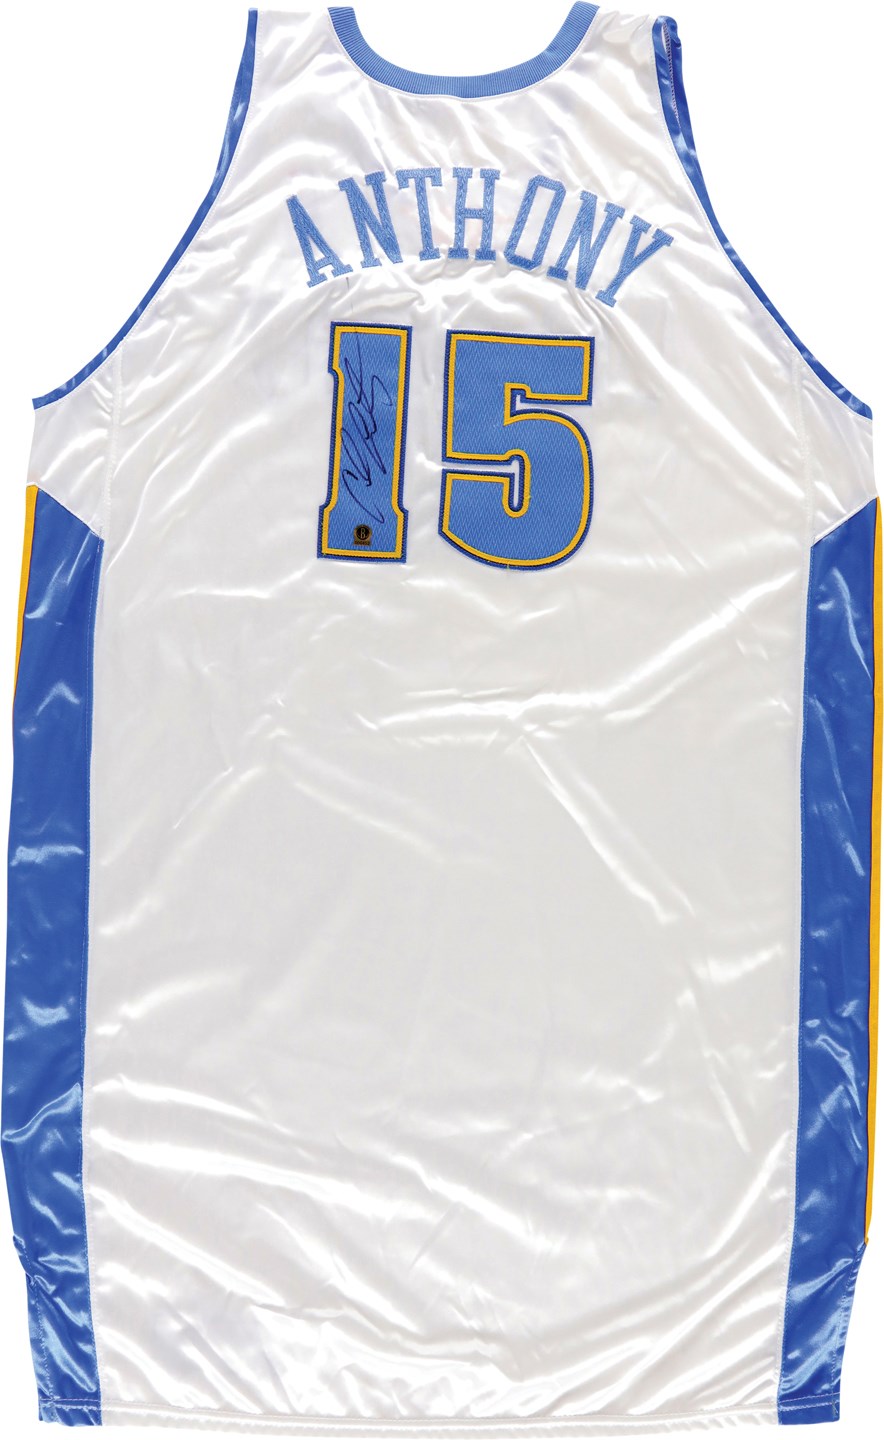 12/26/03 Carmelo Anthony Rookie Denver Nuggets Signed Game Worn Jersey - 37 Point and Season-High Three Pointer Game (Melo Beckett COA)